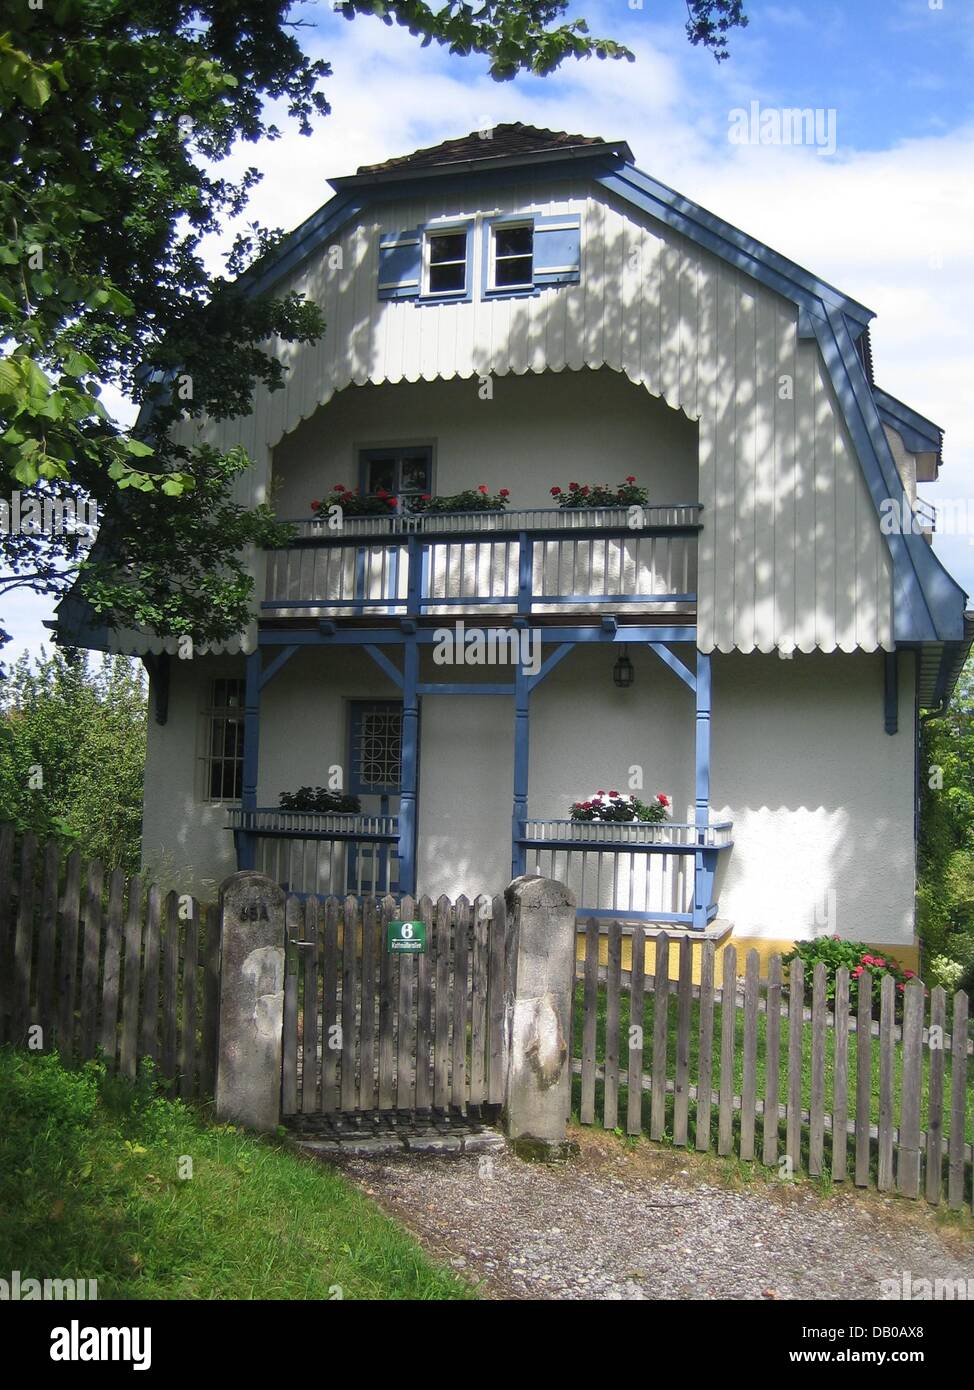 The picture shows the Muenter House in Murnau, Germany, 22 July 2007. From 1909 to 1914 Gabriele Muenter (1877-1962) lived with Wassily Kandinsky (1866-1944) at the so-called 'Russian House' in Murnau. Frequent visits of other painters like Franz Marc, August Macke, Alexej von Jawlensky and Marianne von Werefkin as well as of composer Arnold Schoenberg made the house into one of th Stock Photo